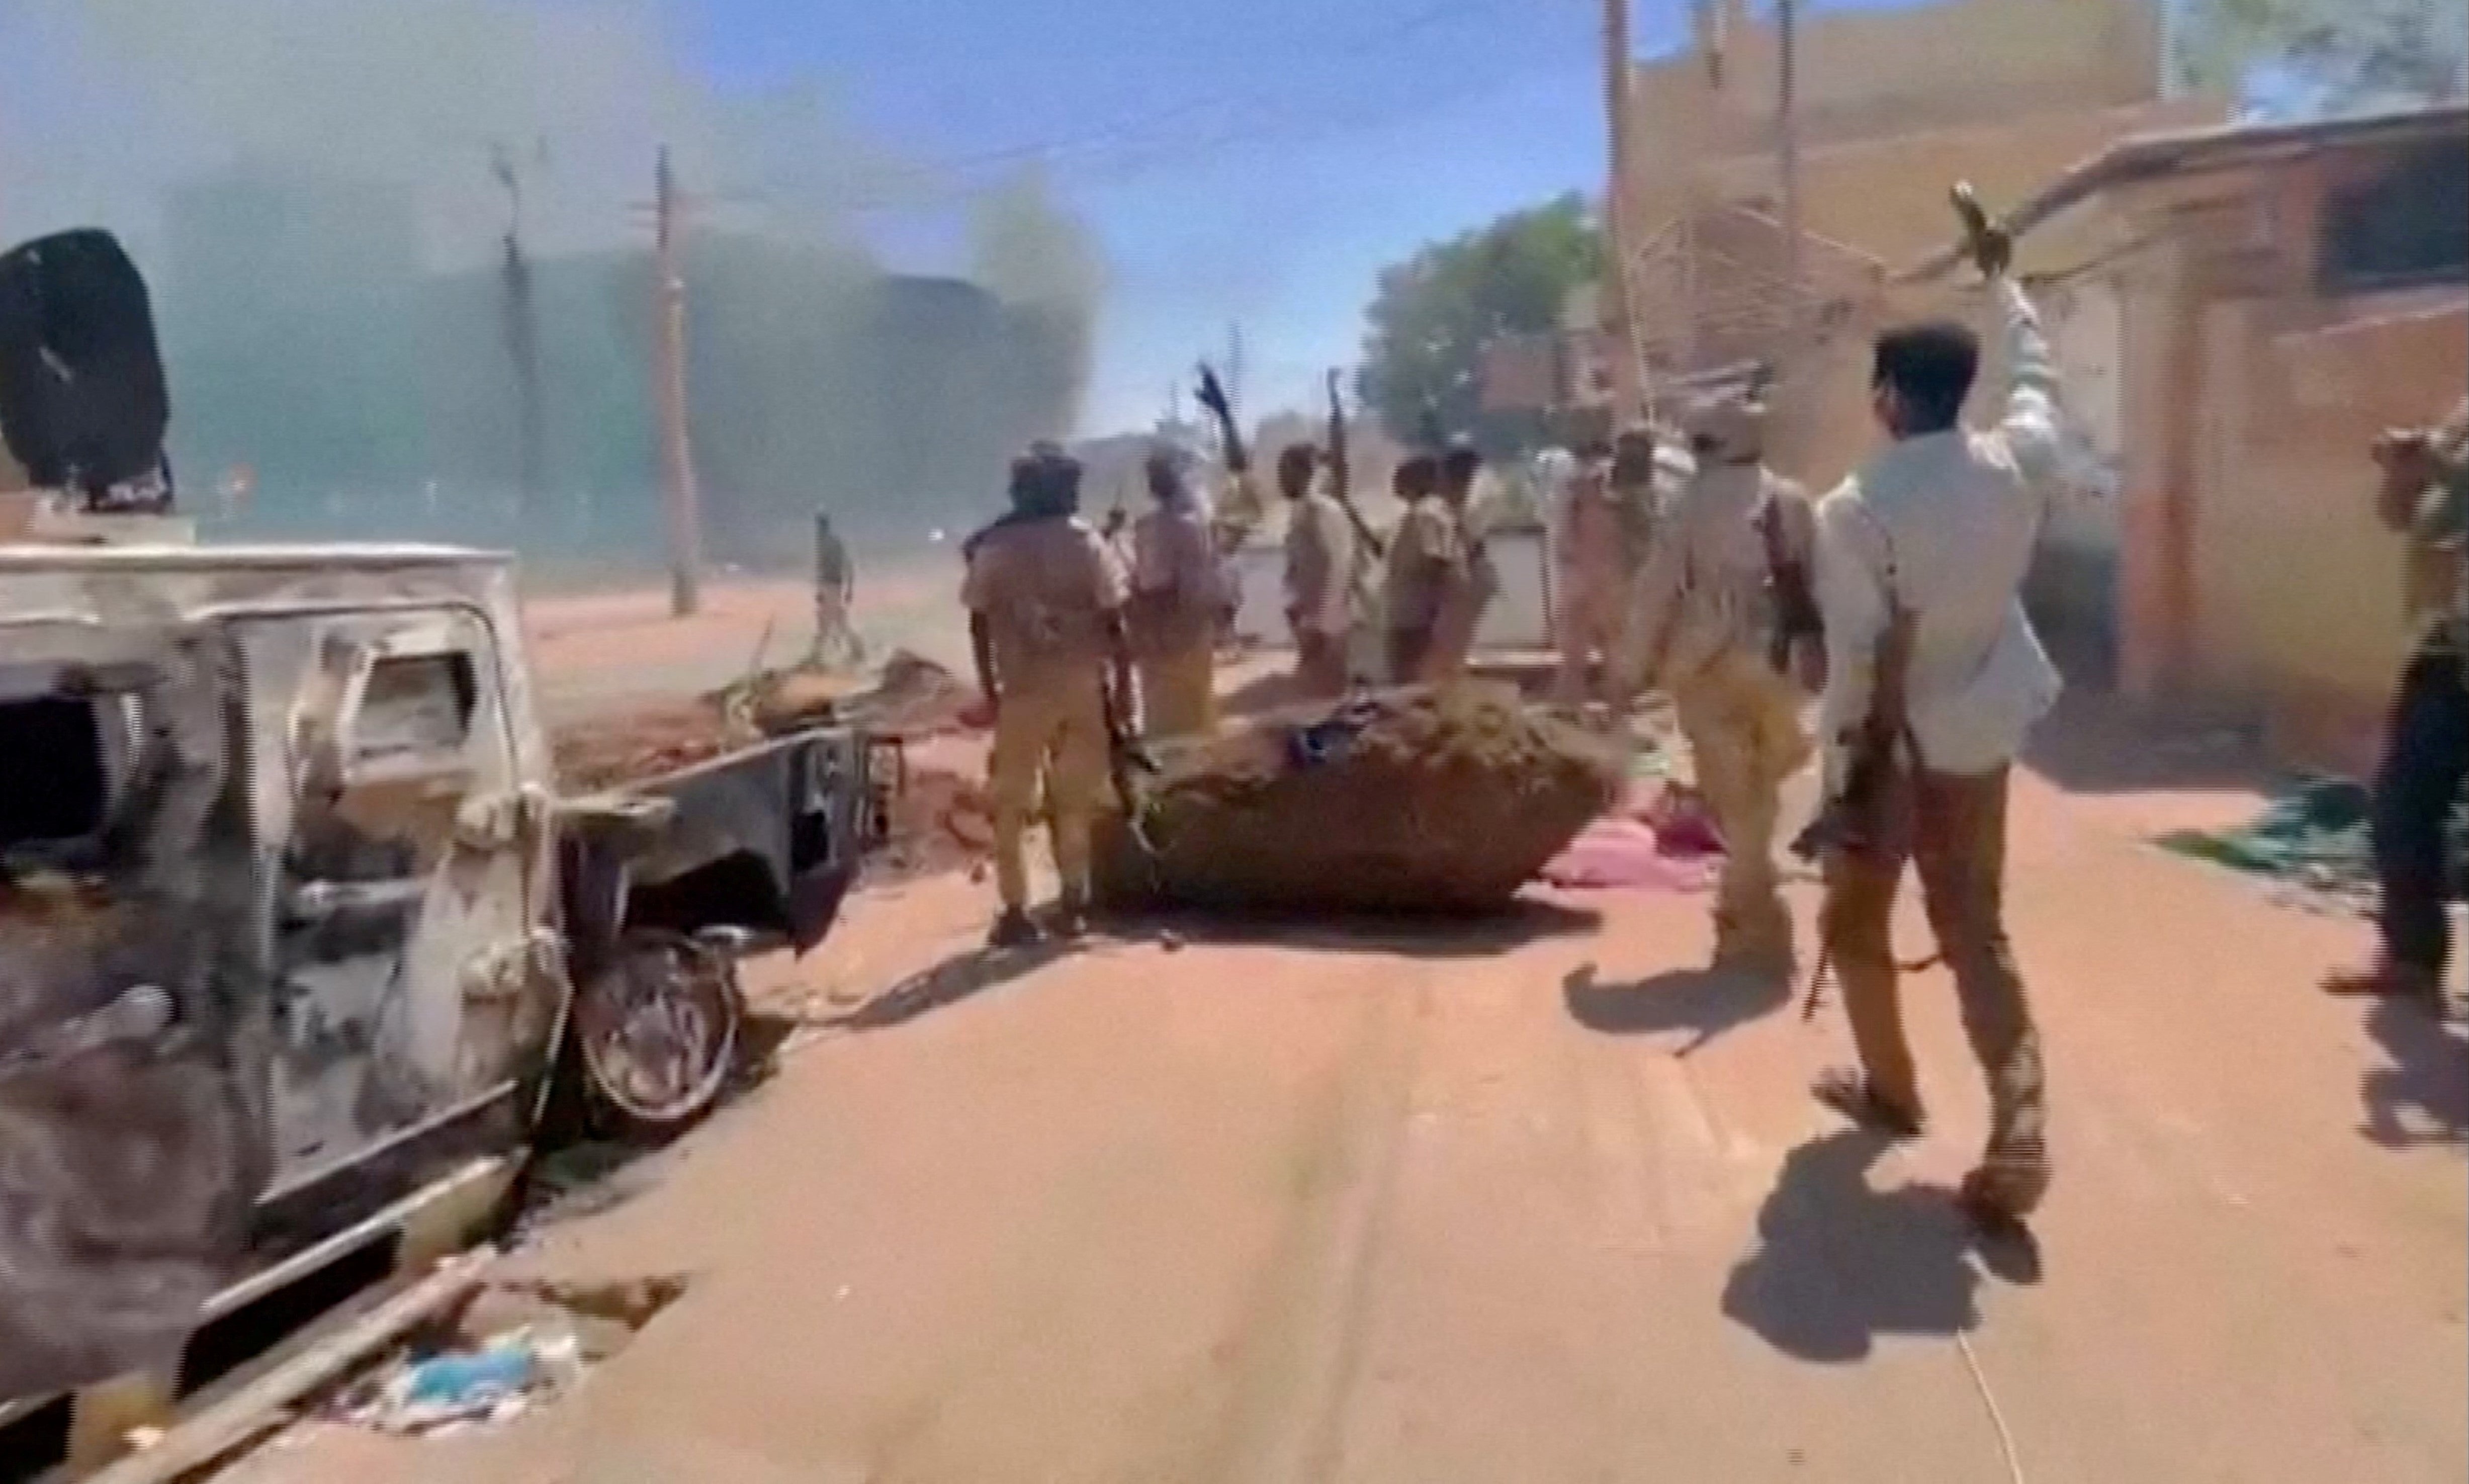 RSF fighters stand near the damaged Air Defence Forces command center in Khartoum, Sudan May 17, 2023, in this screen grab obtained from a social media video.